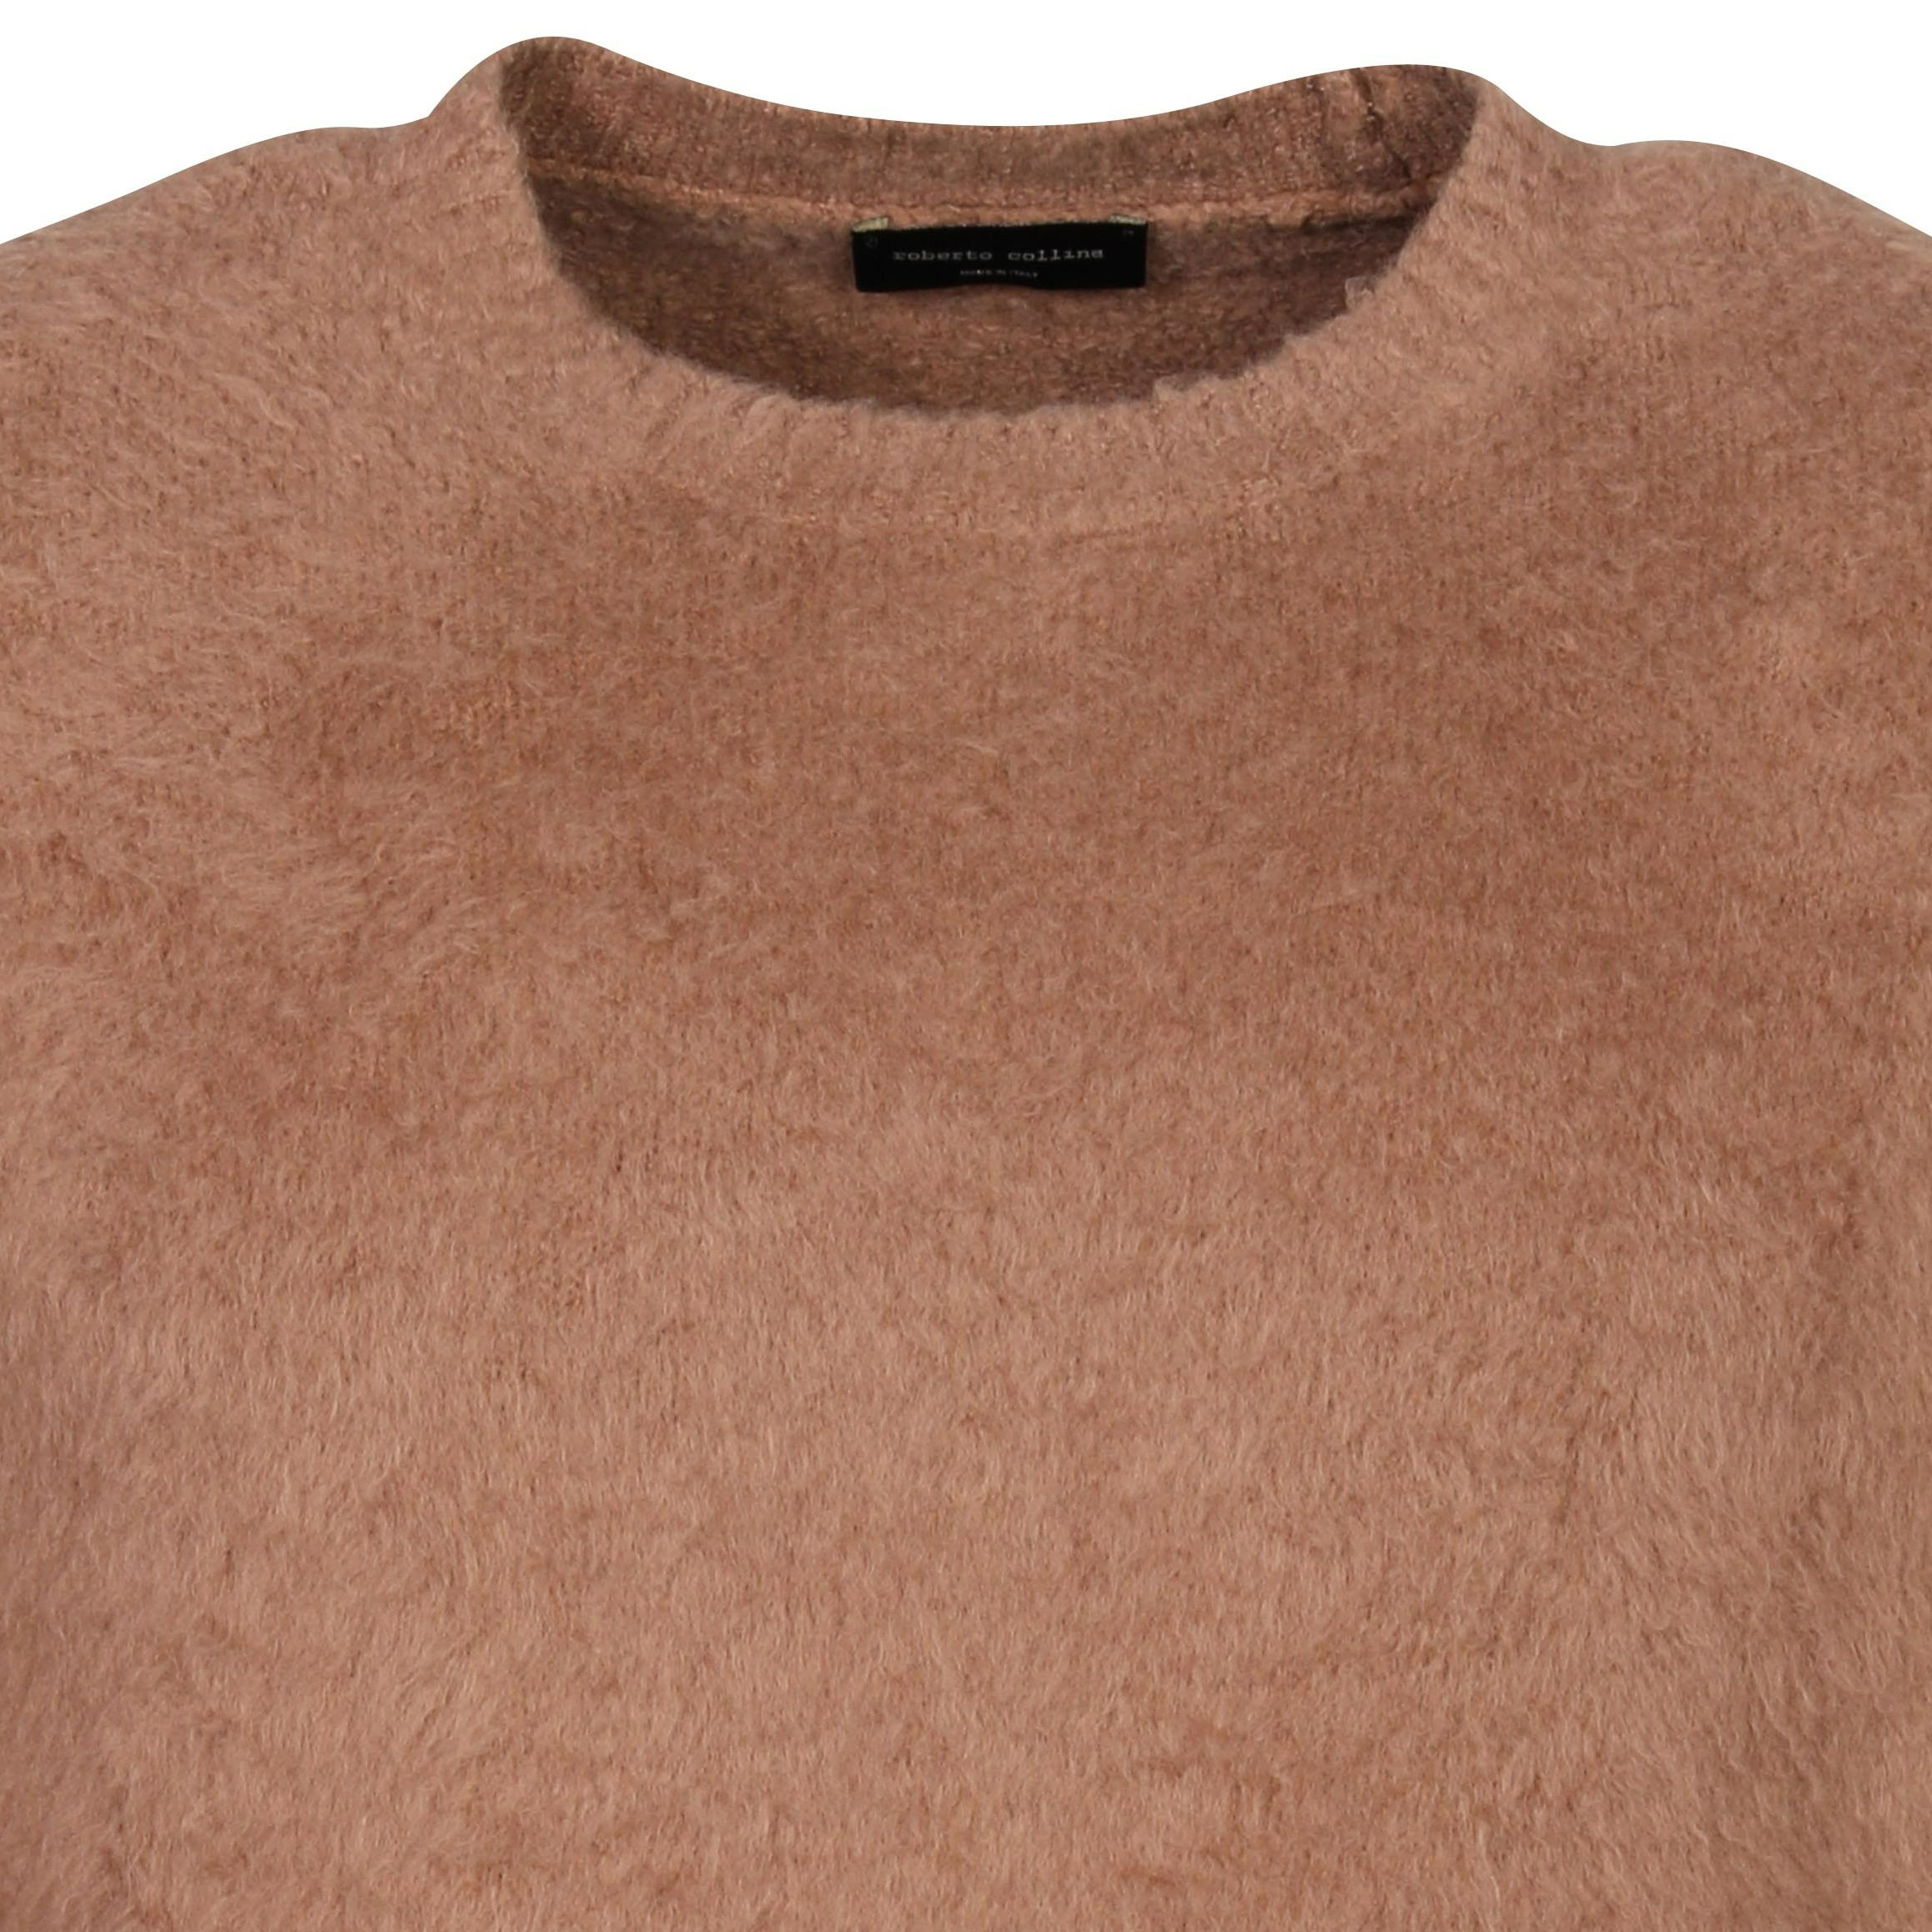 Roberto Collina Cotton Fluffy Knit Pullover in Camel